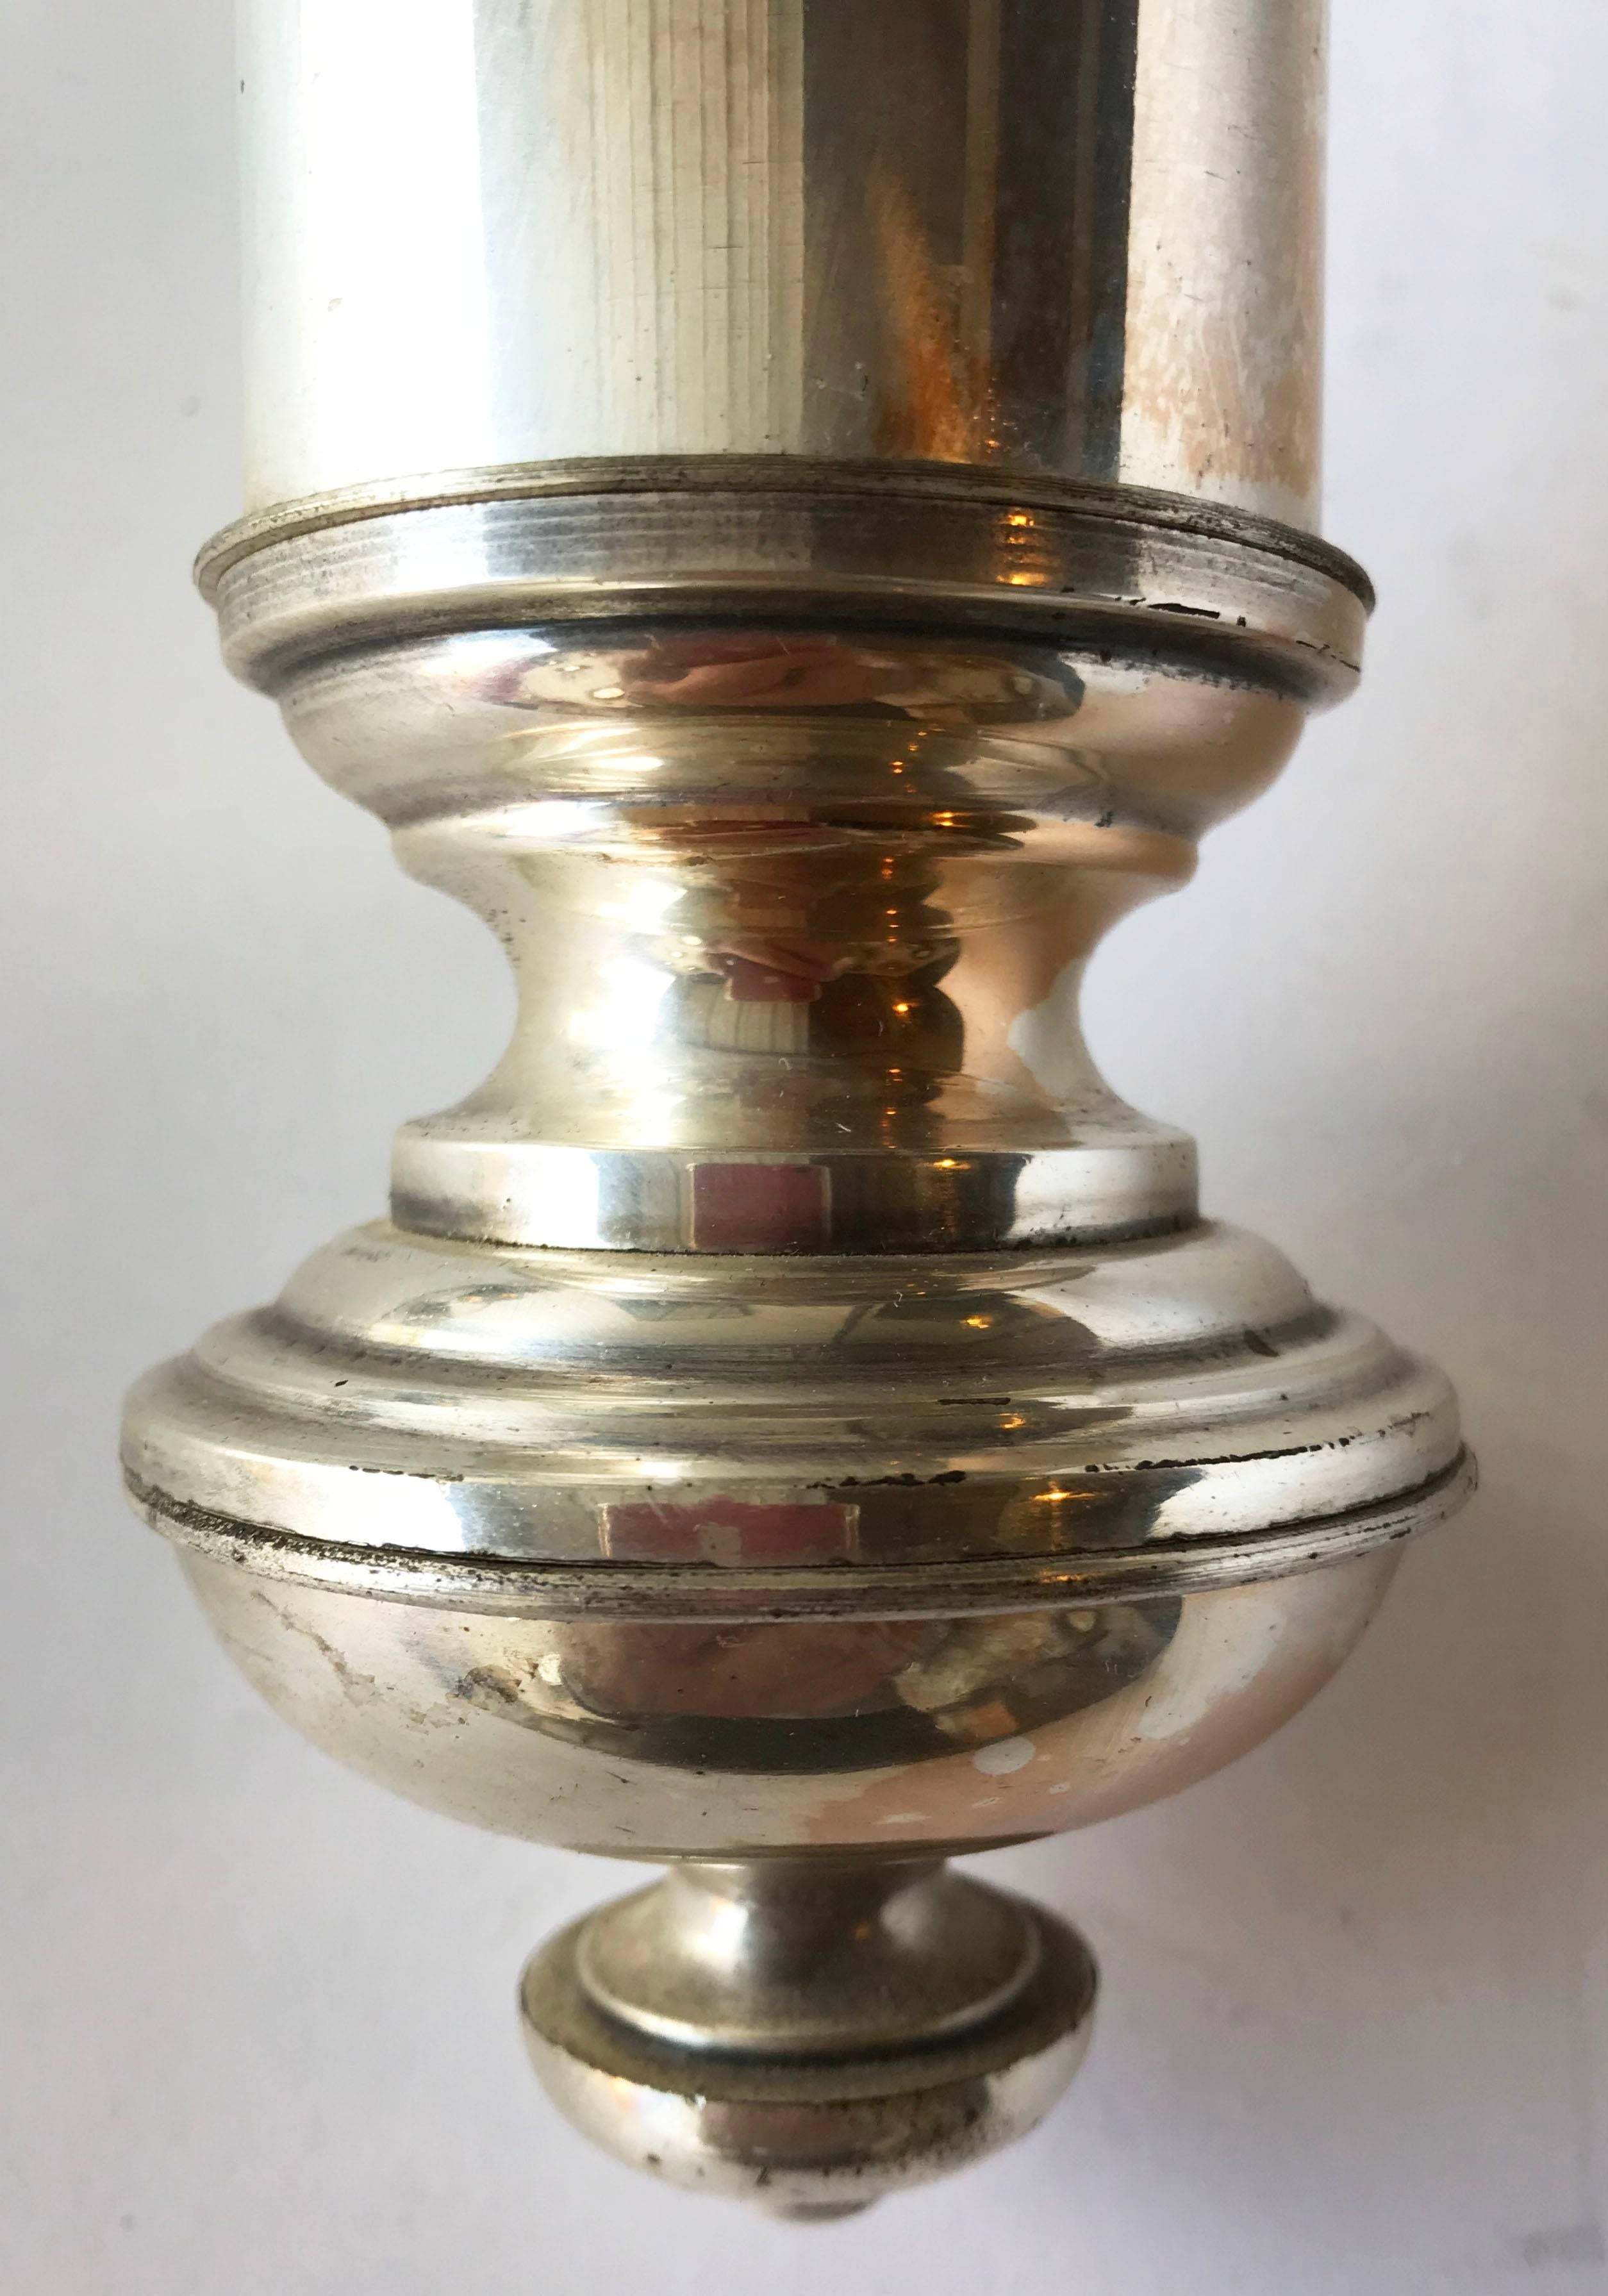 Pair of one light silvered brass sconces by Maison Lancel
US wired and in working condition.
80 watts max bulb
Backplate: 6 inches diameter.